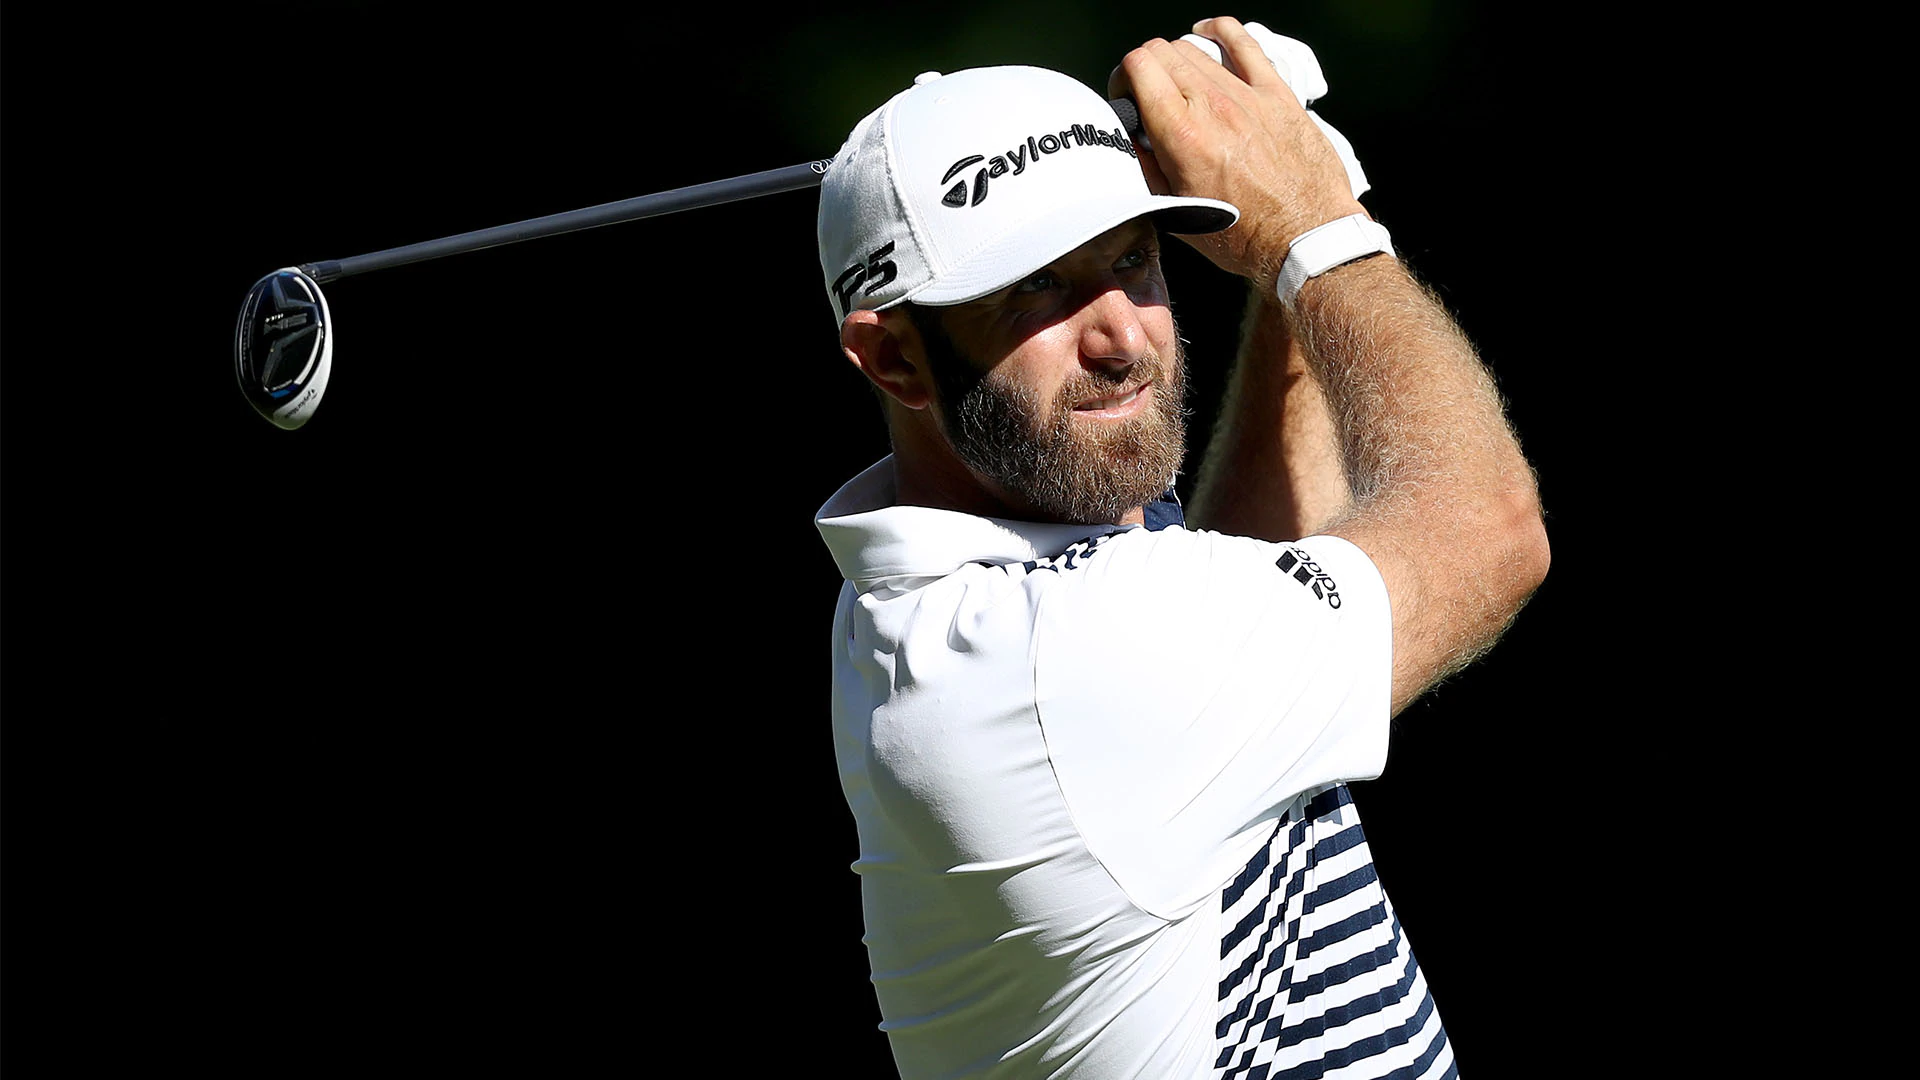 Dustin Johnson grouped with Tony Finau, Tommy Fleetwood at 3M Open